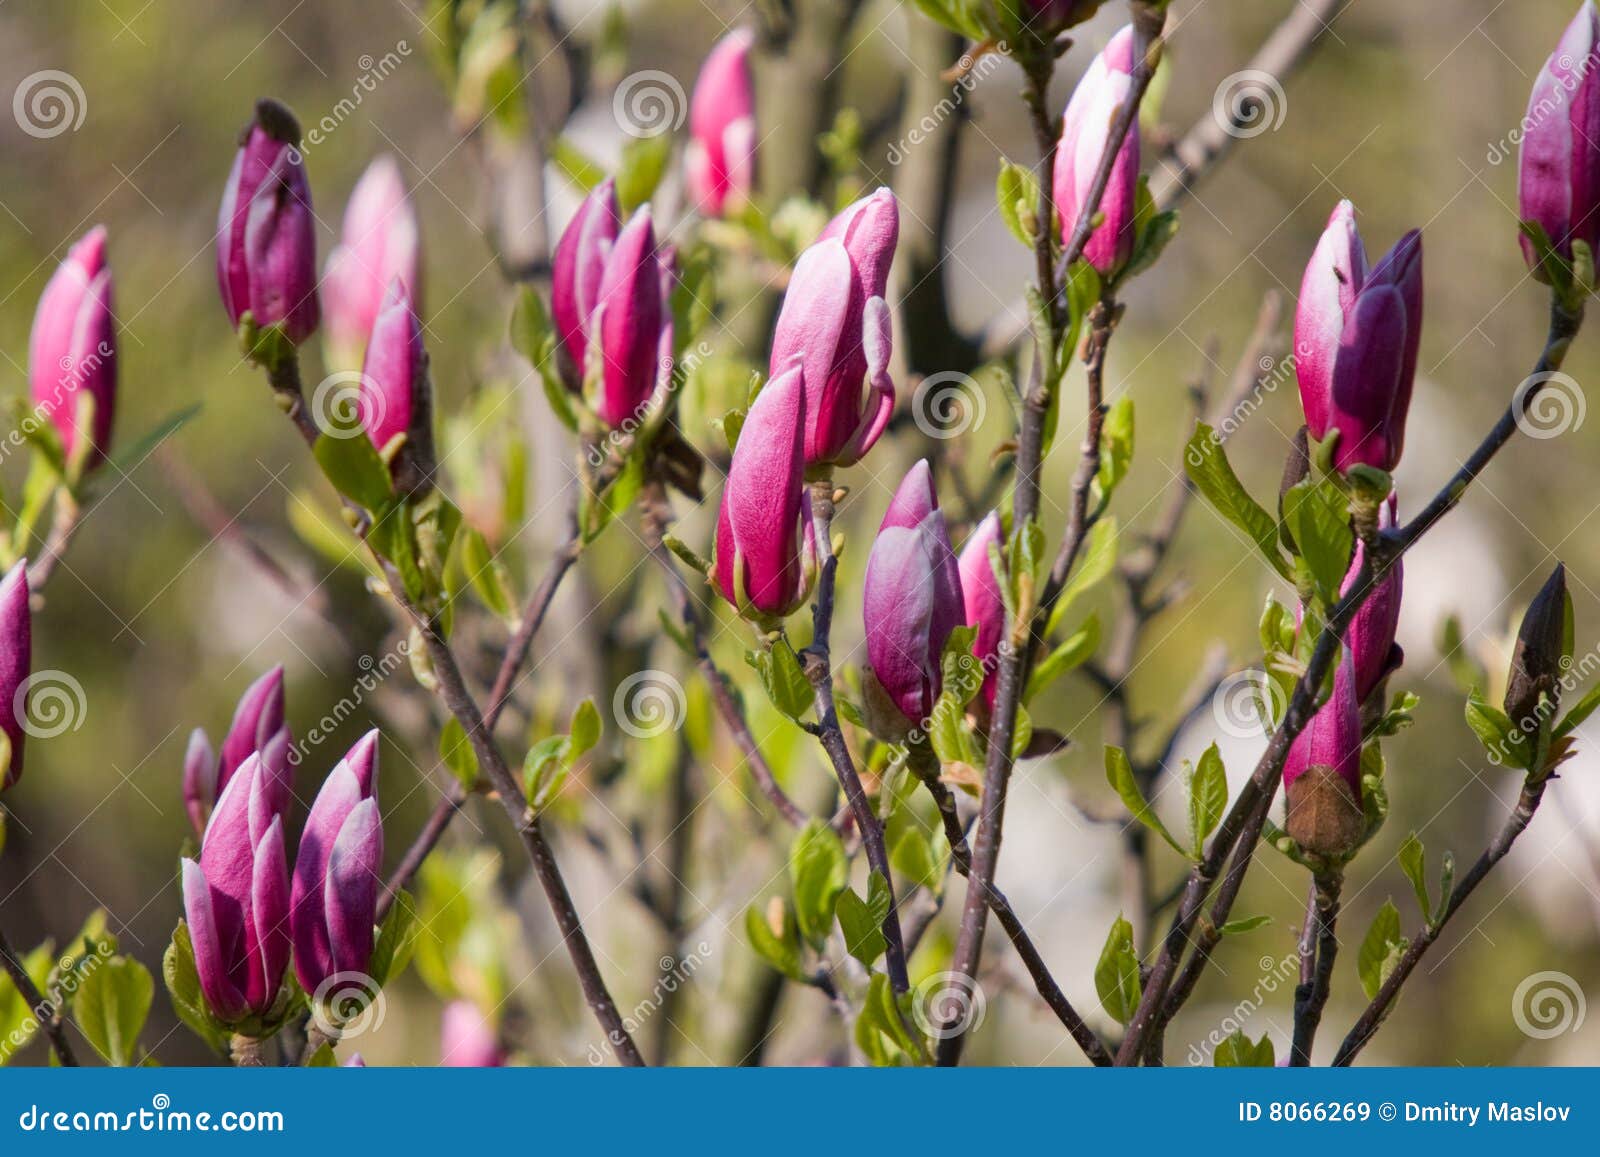 Branches of magnolia stock image. Image of fragility, blossom - 8066269